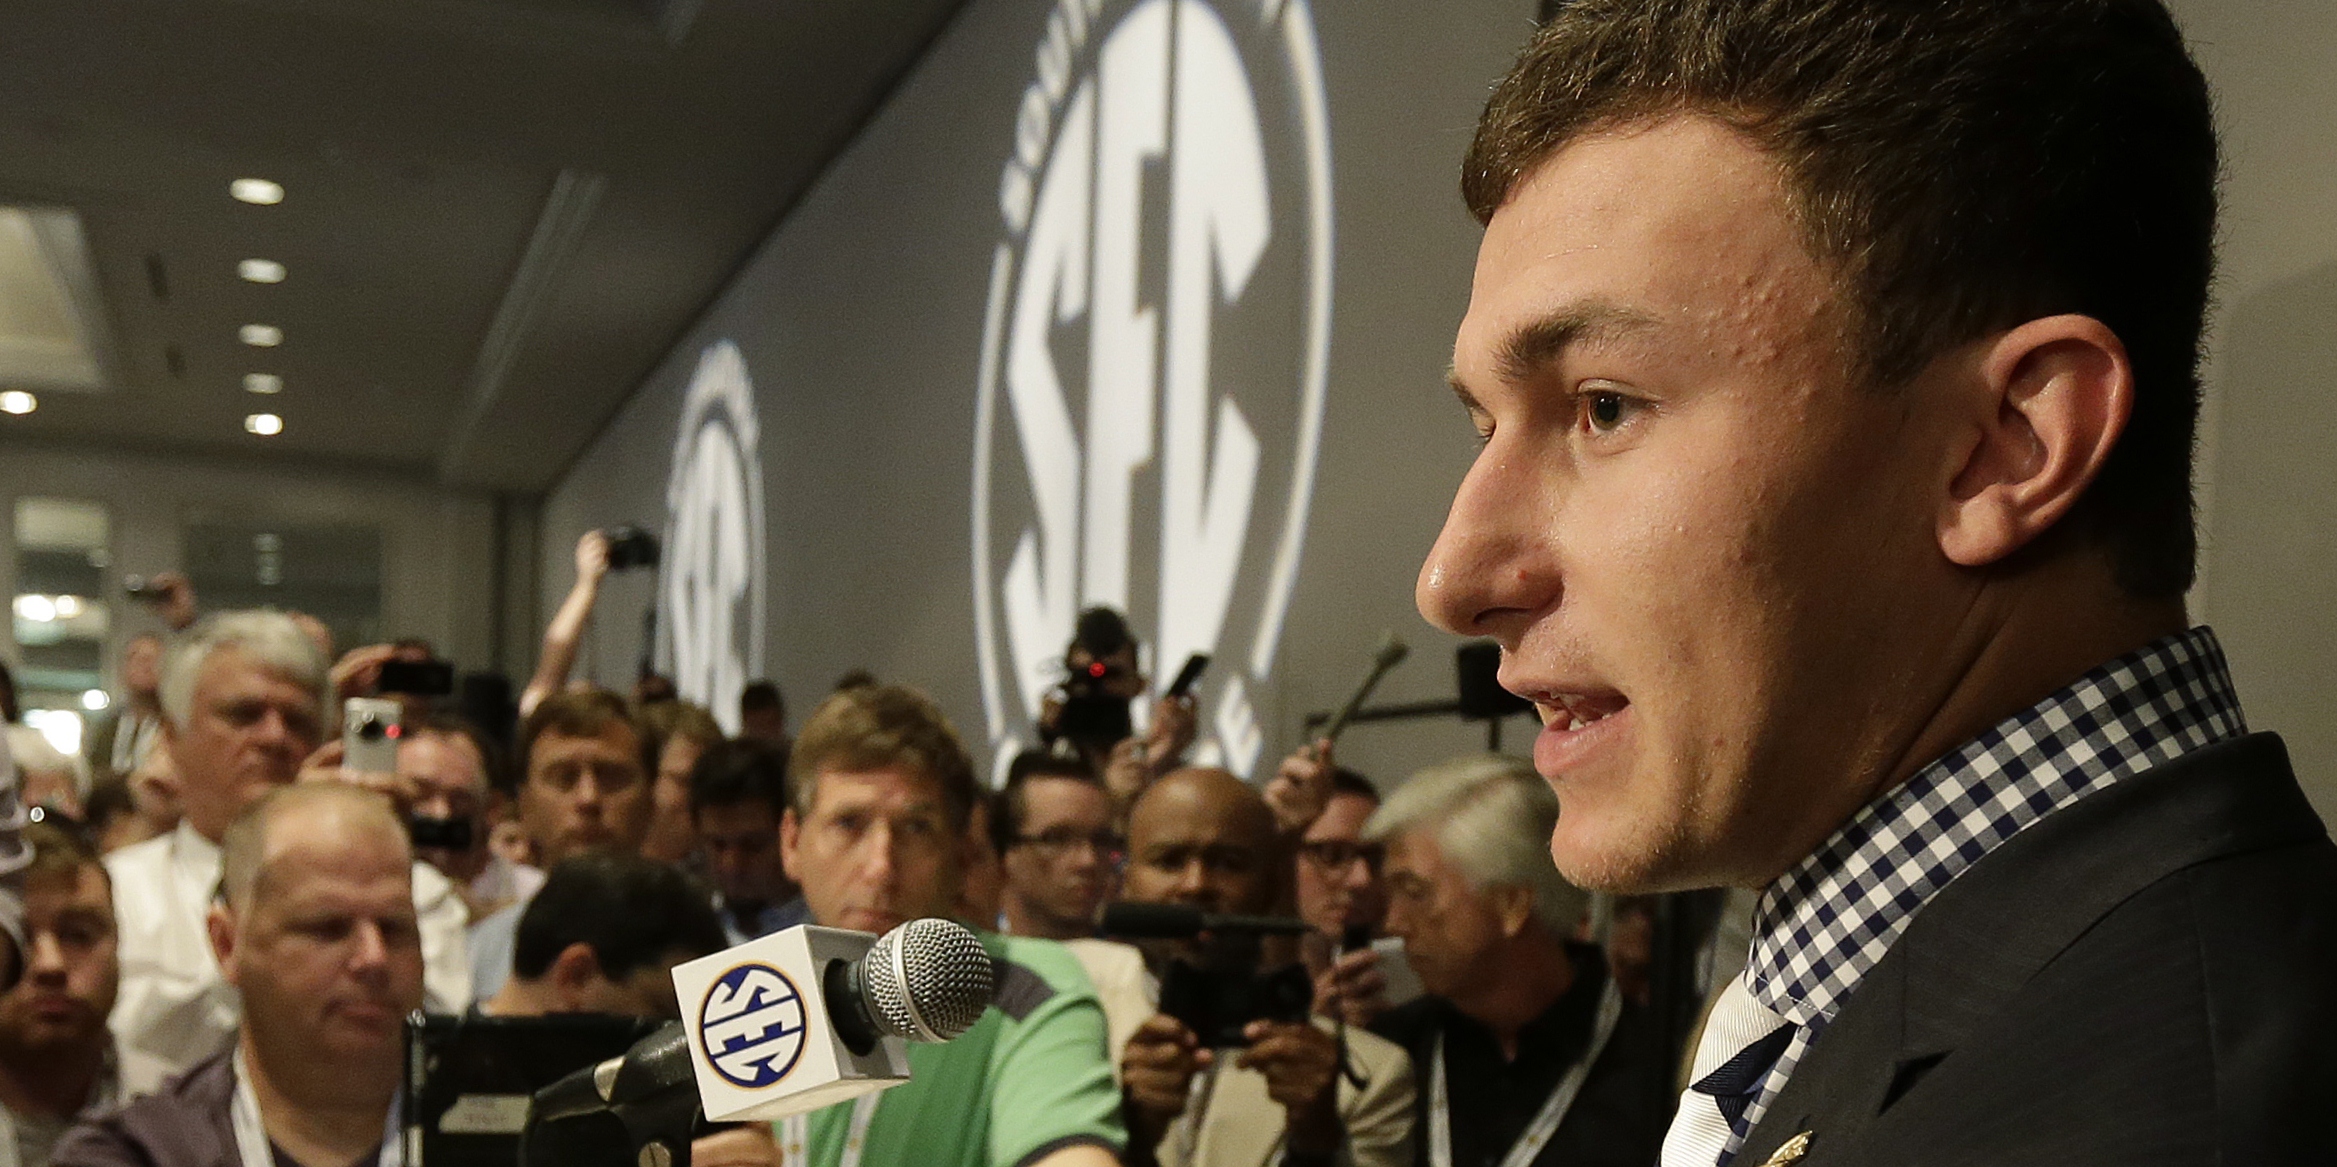 Johnny Manziel answering questions at the 2013 SEC Media Days in Birmingham. Duane Rankin was among the media present filming Manziel